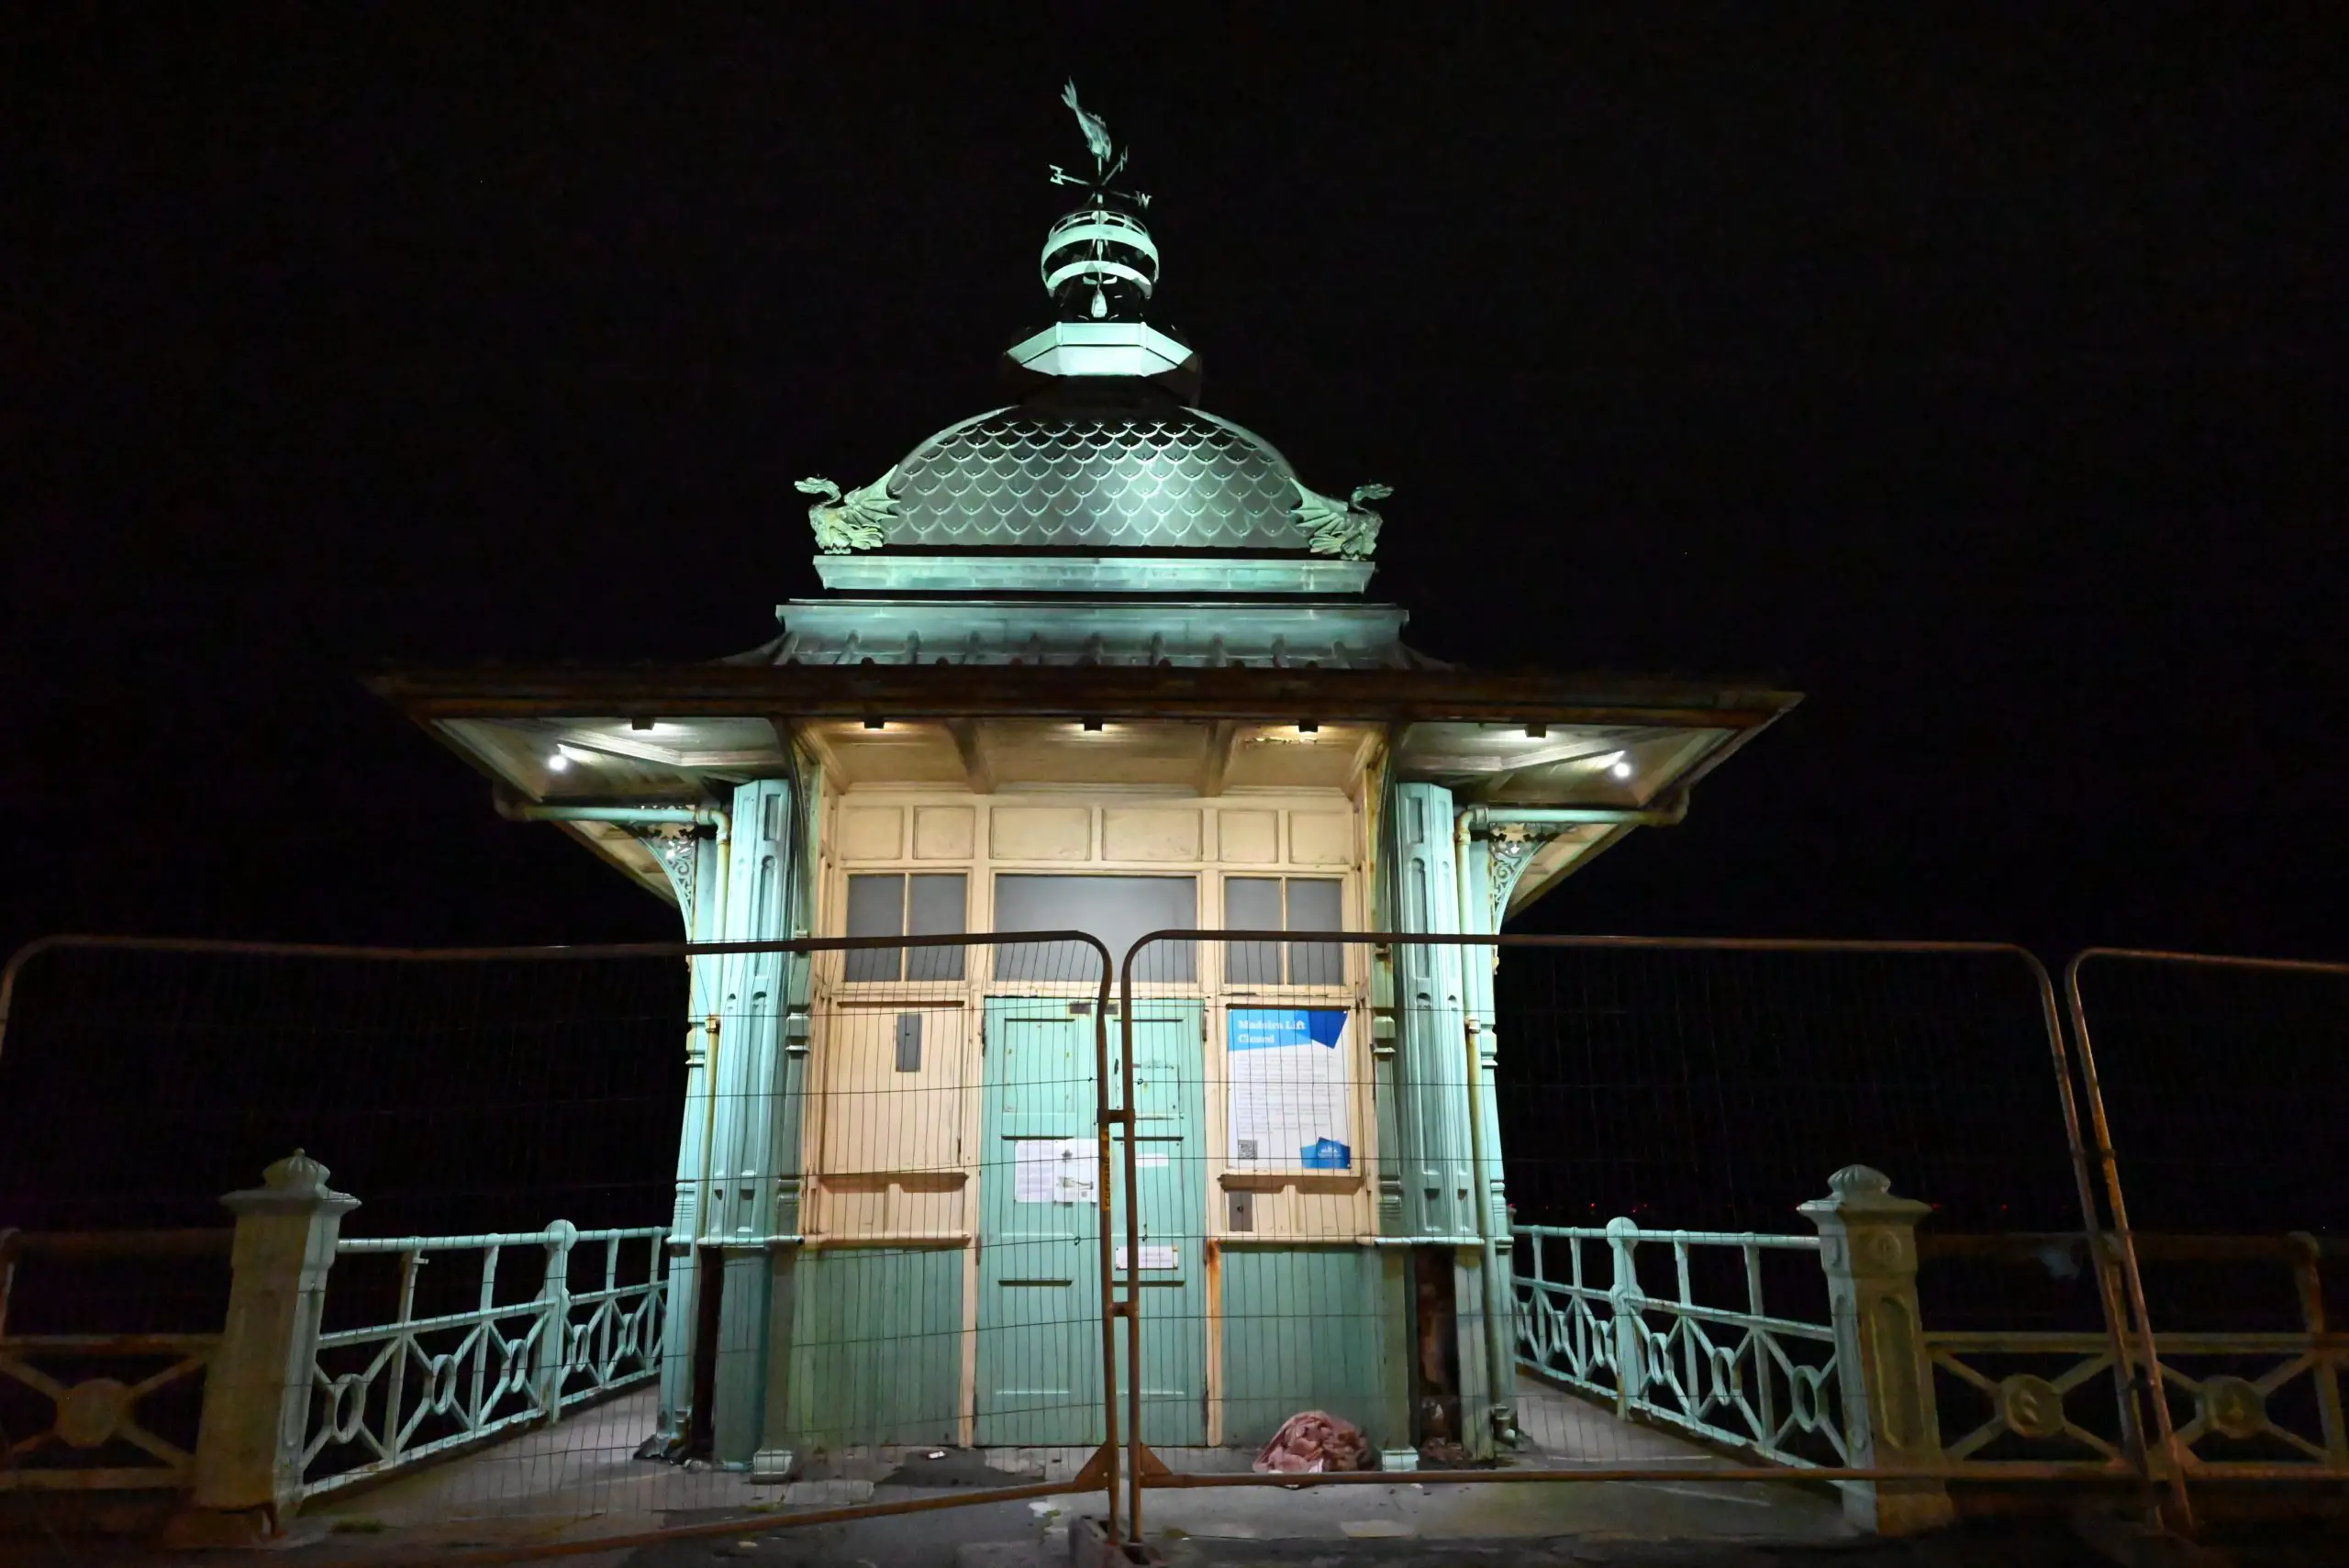 Madeira Lift in Brighton at night, lit up with a barrier around it to indicate closure.